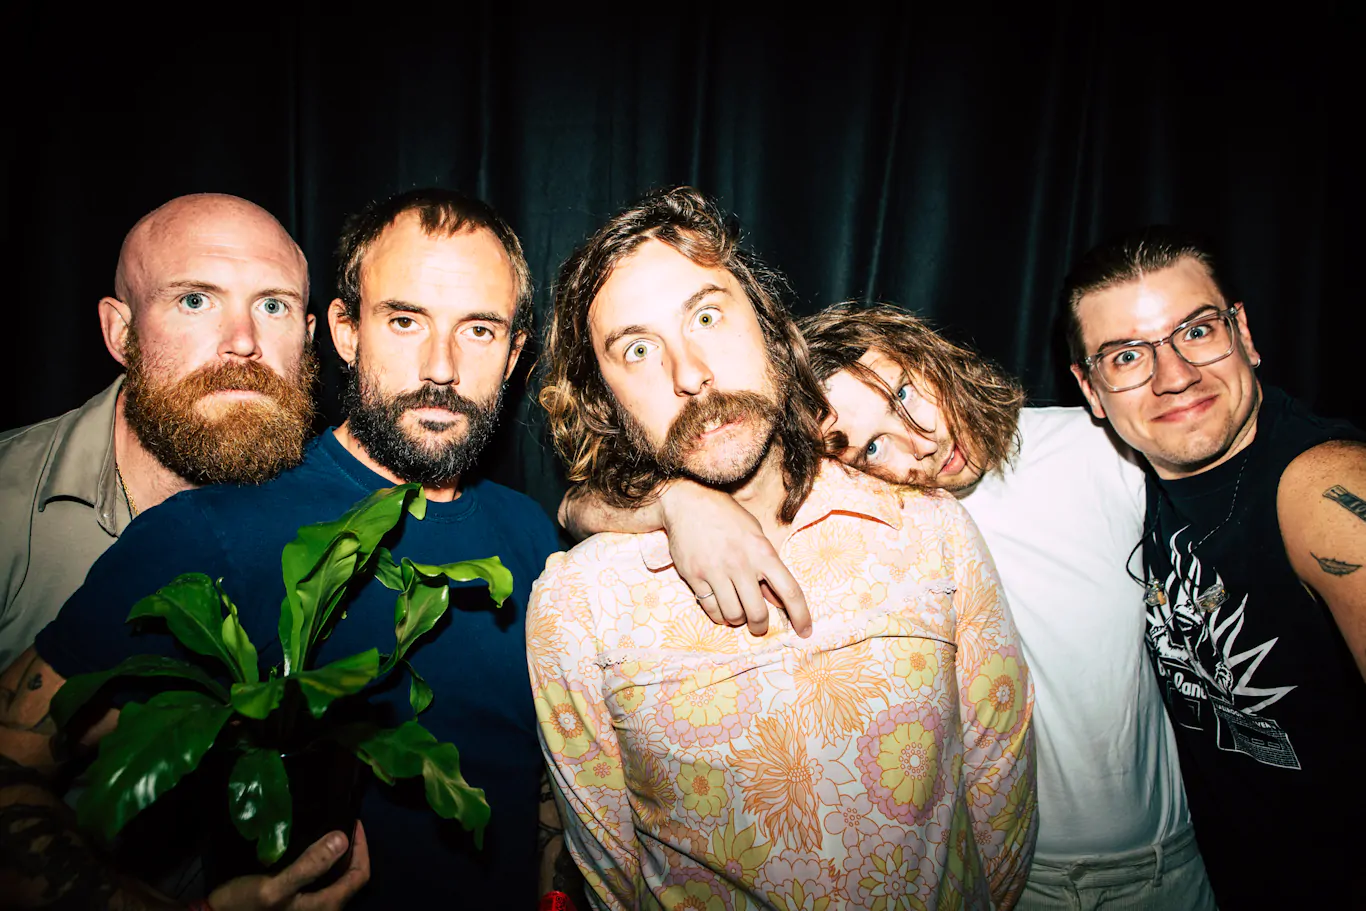 IDLES announce ‘Five Years of ‘Brutalism’ release this December